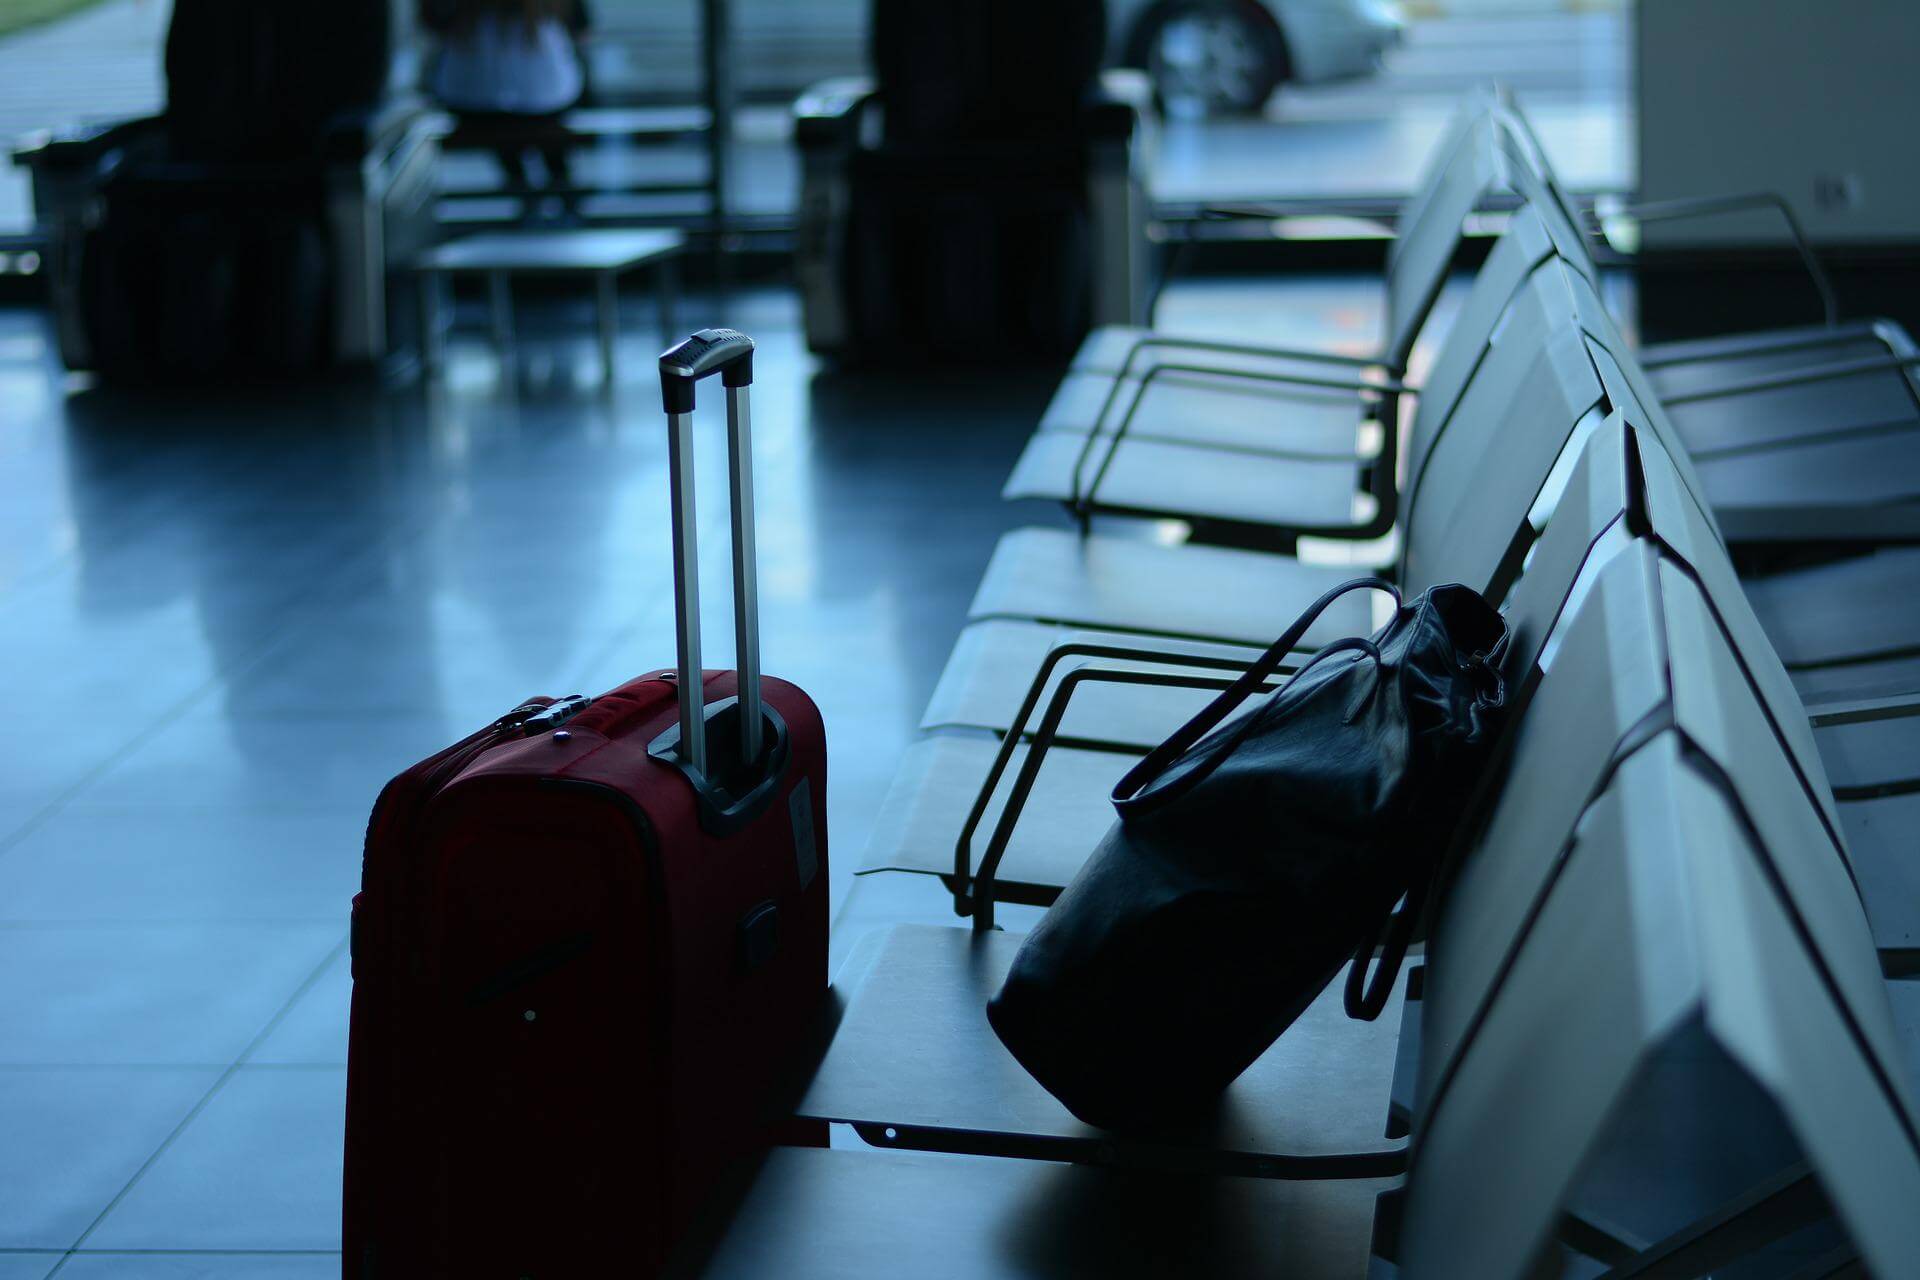 How does frequent business travel impact health and wellbeing?